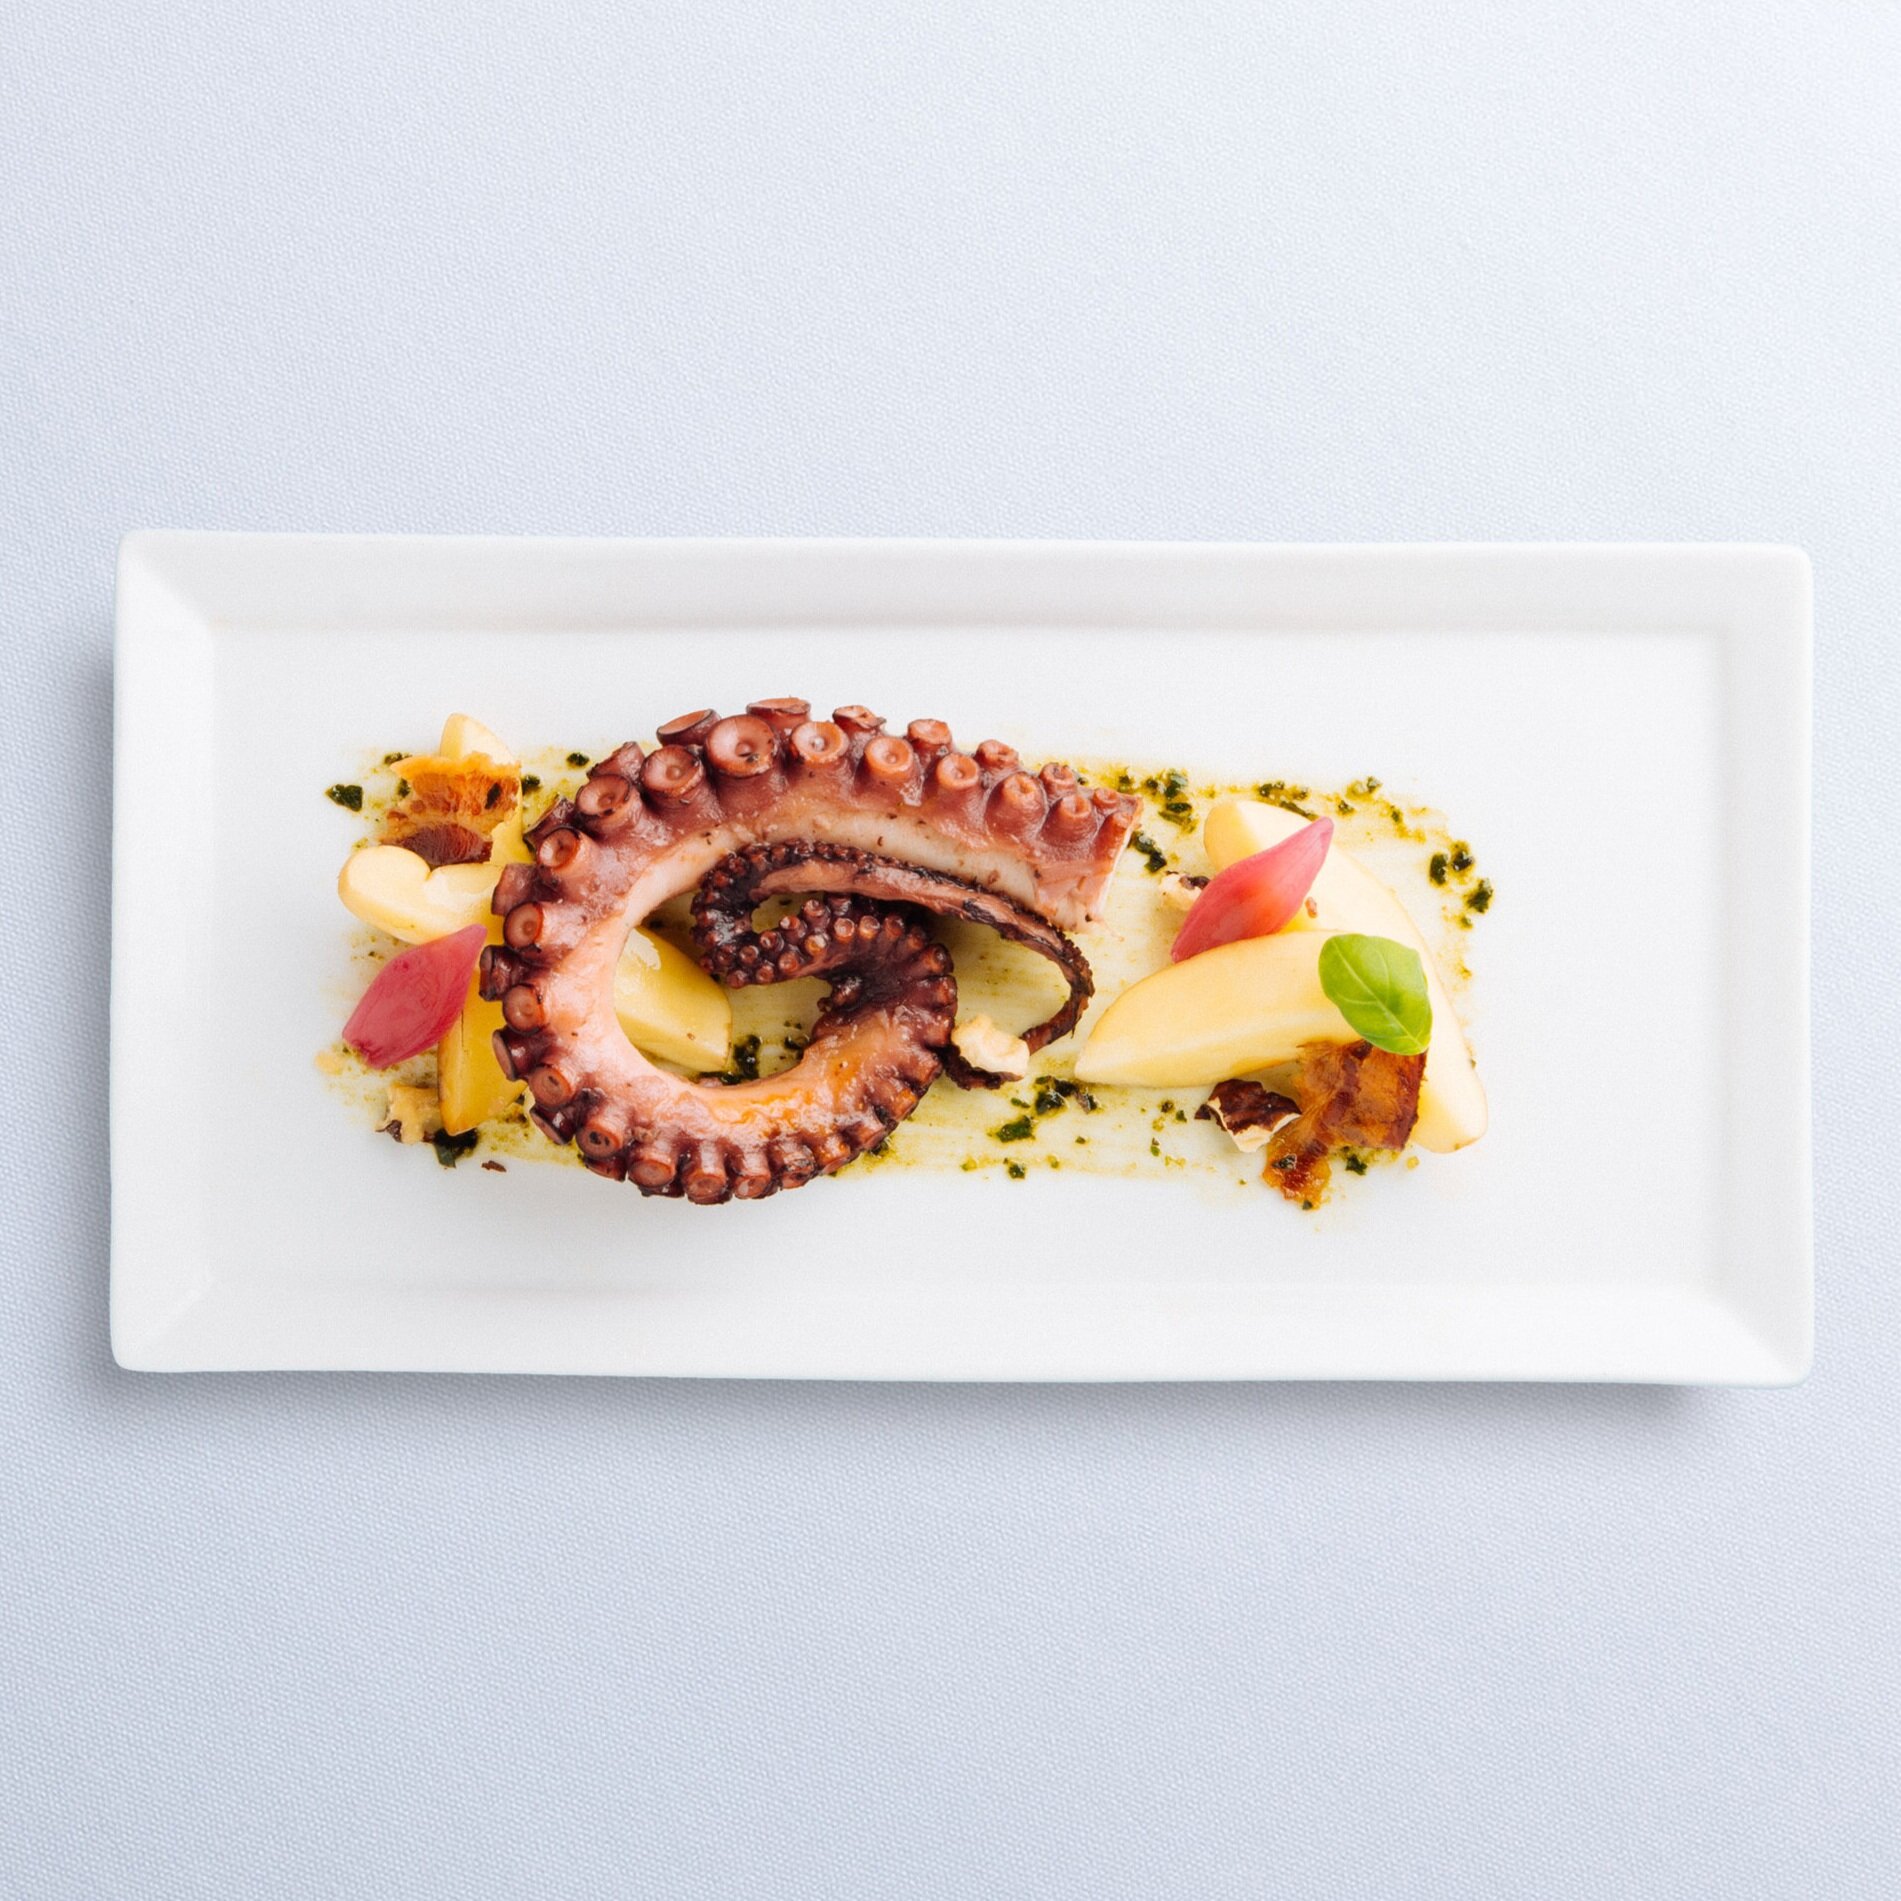 An entrée at The Restaurant of Grilled Octopus, Fingerling Potatoes, Almonds, Prosciutto &amp; Pesto (Copy) (Copy)